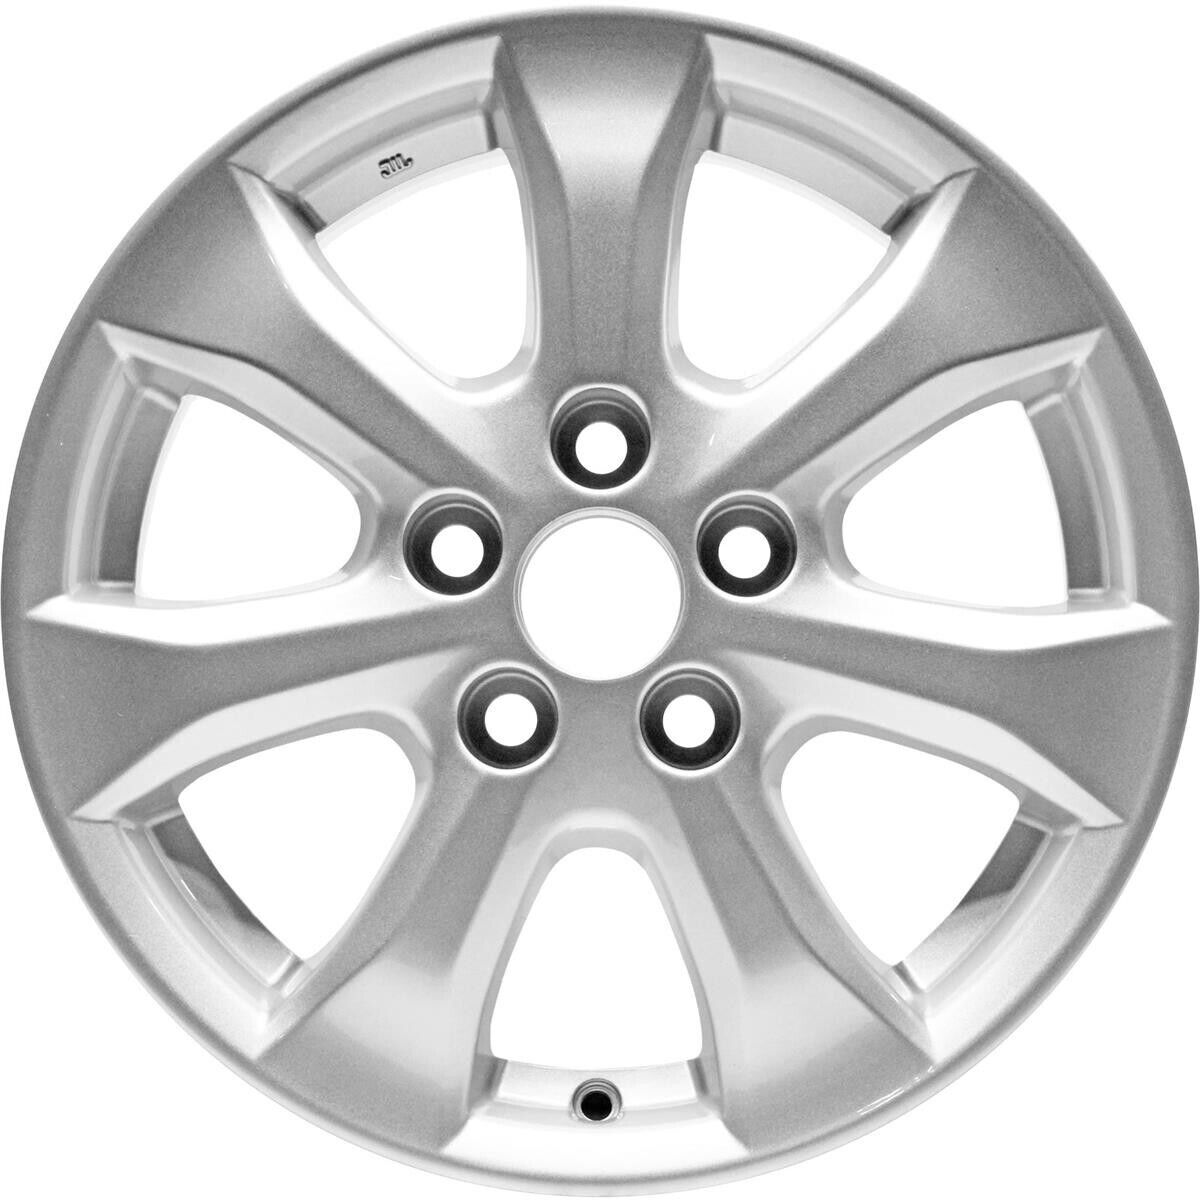 New 16X6.5 Inch Aluminum Wheel For 2007-2011 Toyota Camry Silver Rim